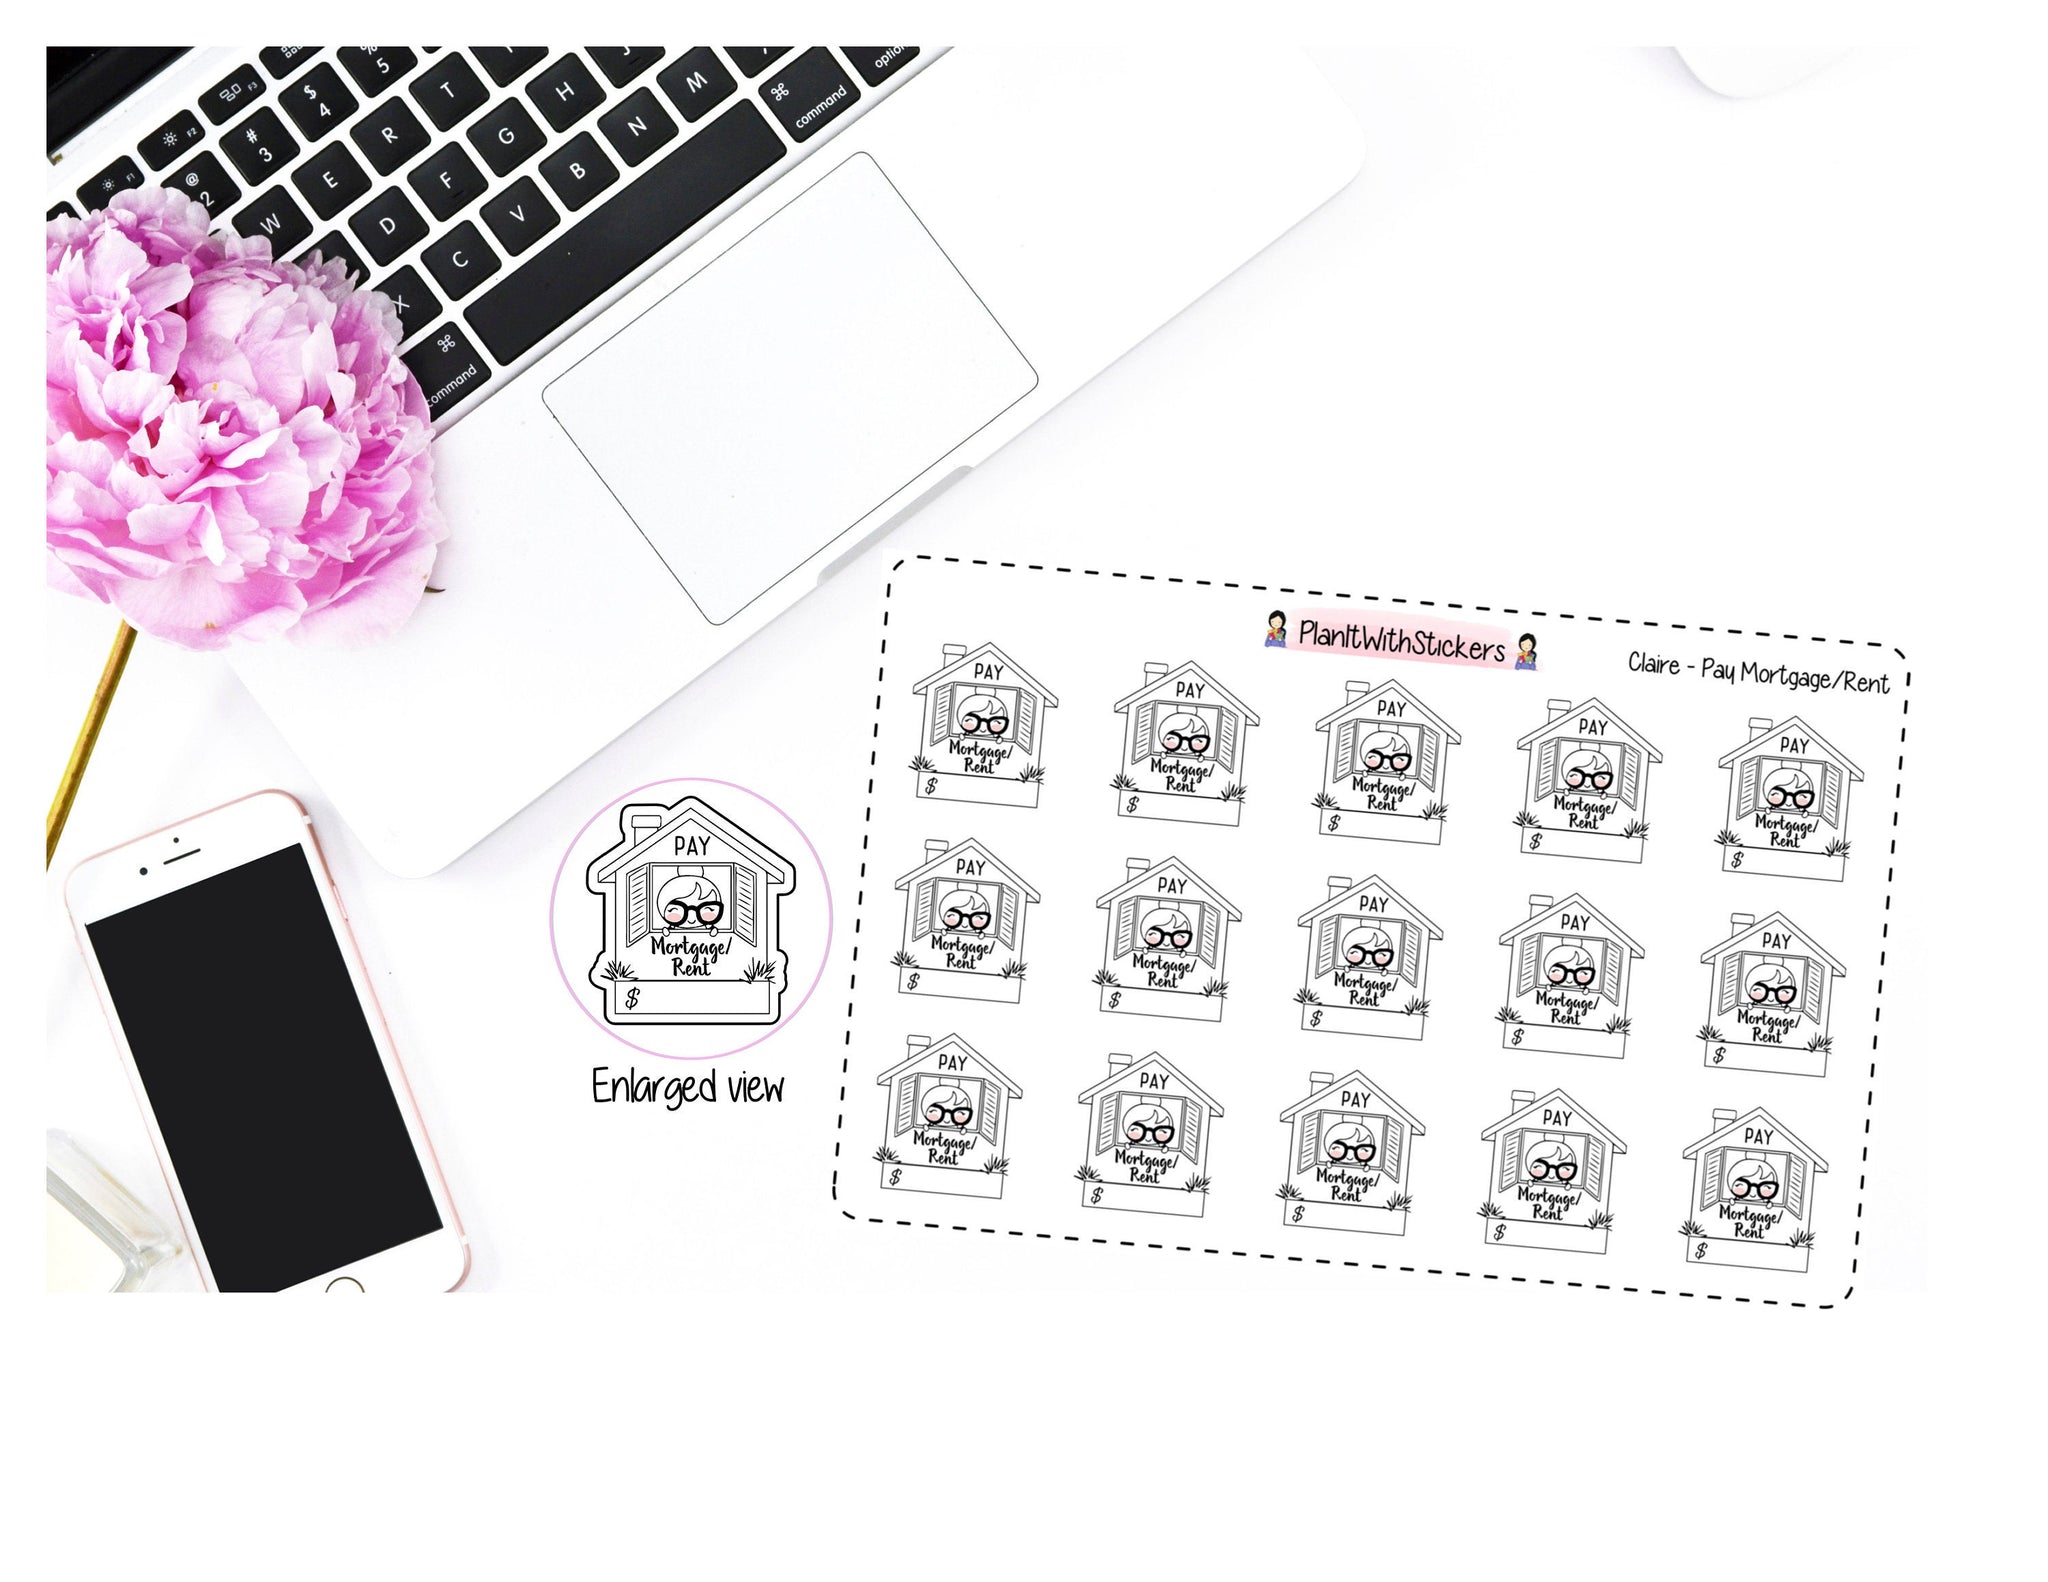 Rent Due / Mortgage Due Money Finance Stickers for , Plum Paper, Recollections, and similar planners